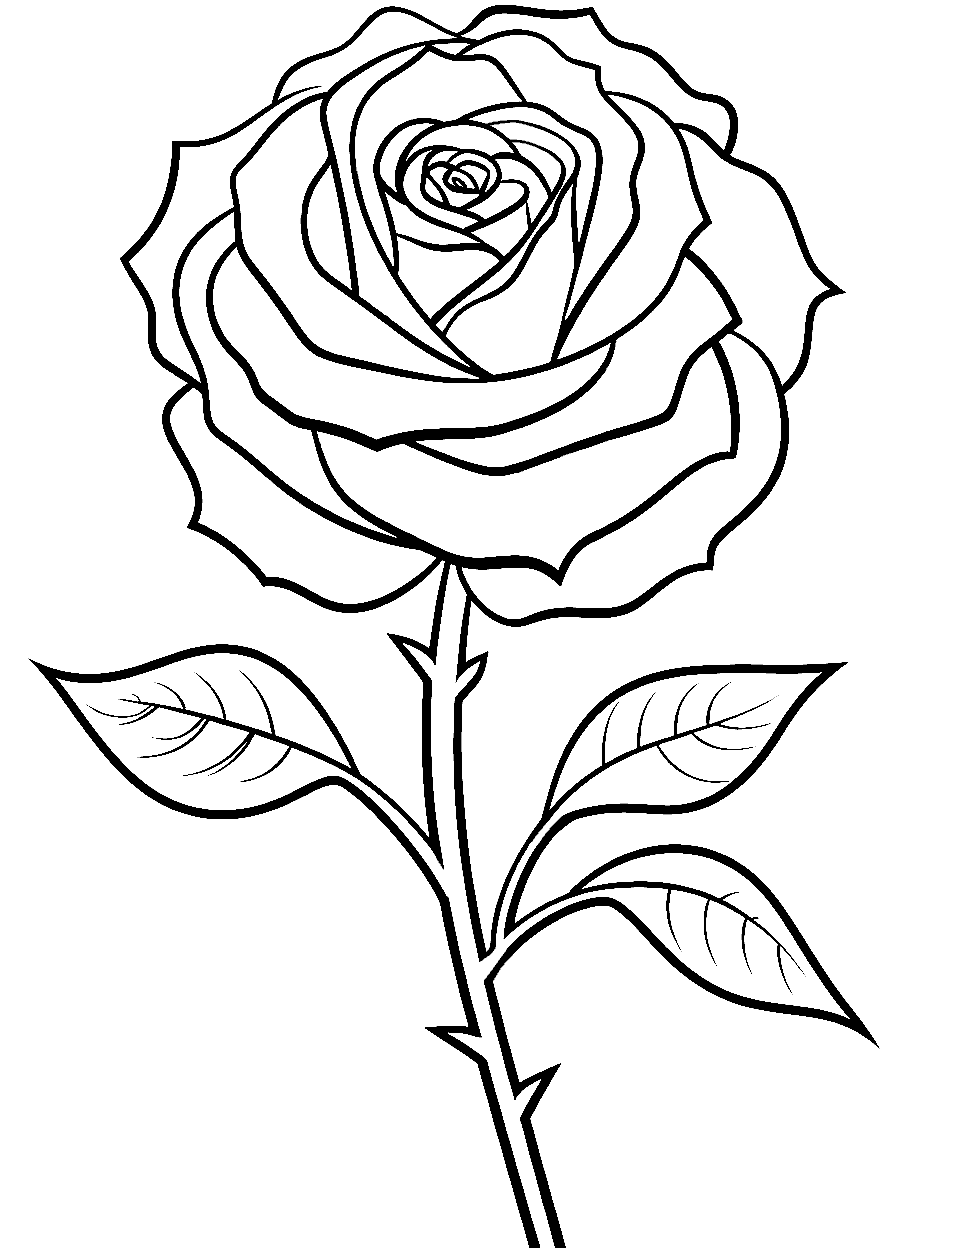 Easy and Minimalist Rose Coloring Page - A simple yet beautiful rose with soft petals and a short stem.